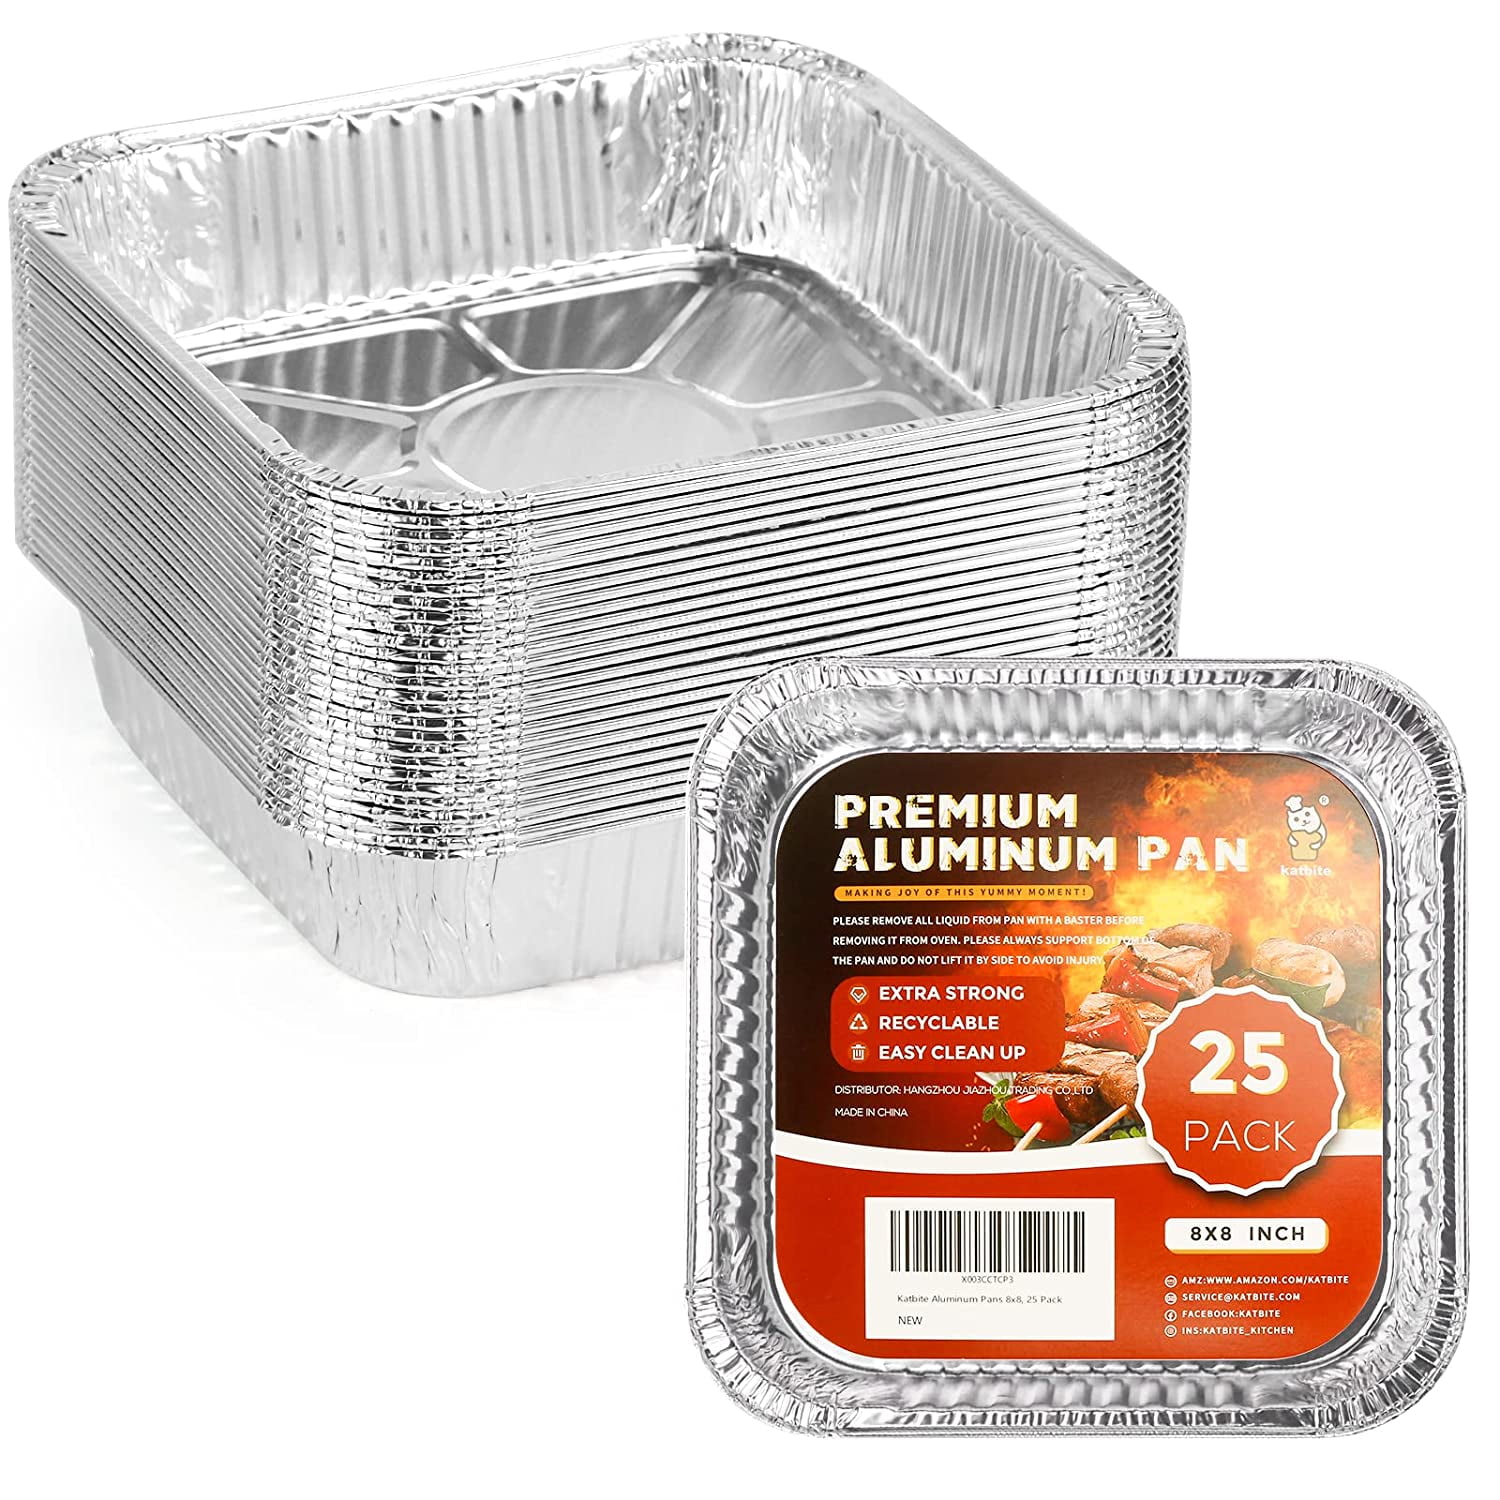 Reynolds Kitchens Aluminum Pans with Lids, Blue, 8x8 Inch, 3 Count